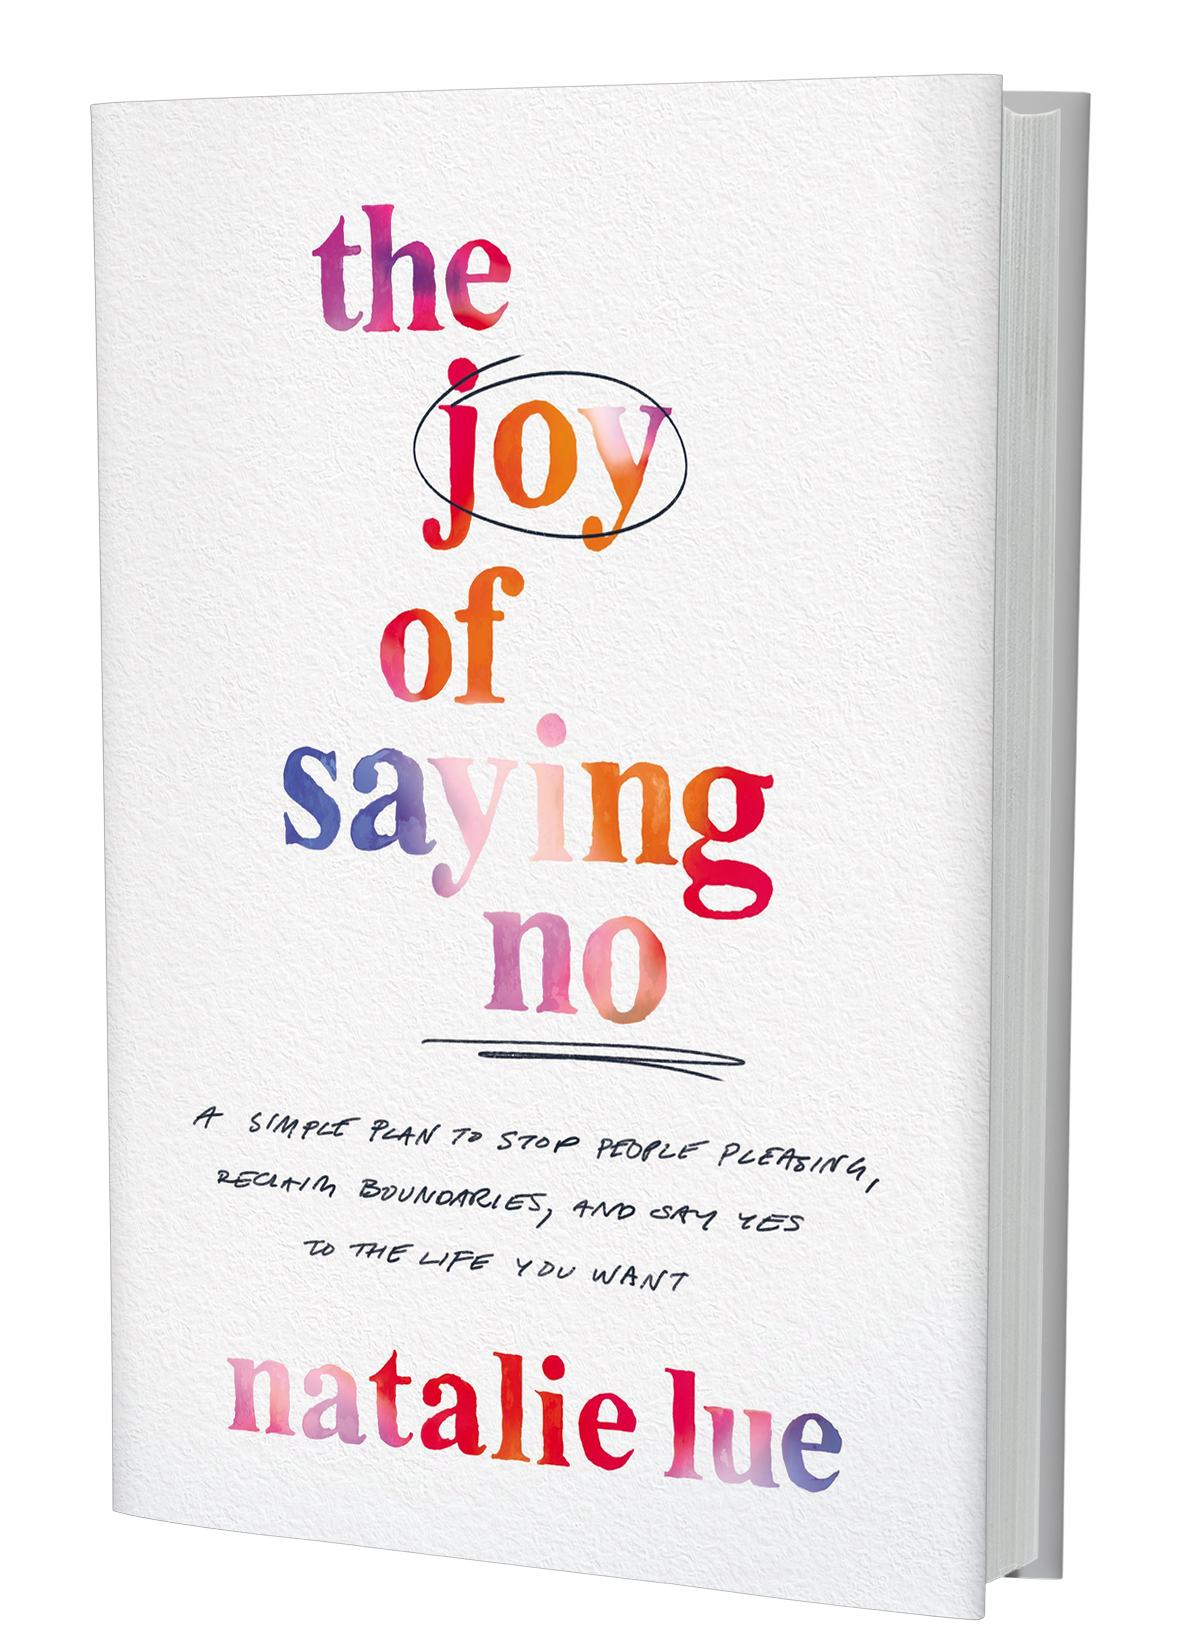 The Joy of Saying No by Natalie Lue